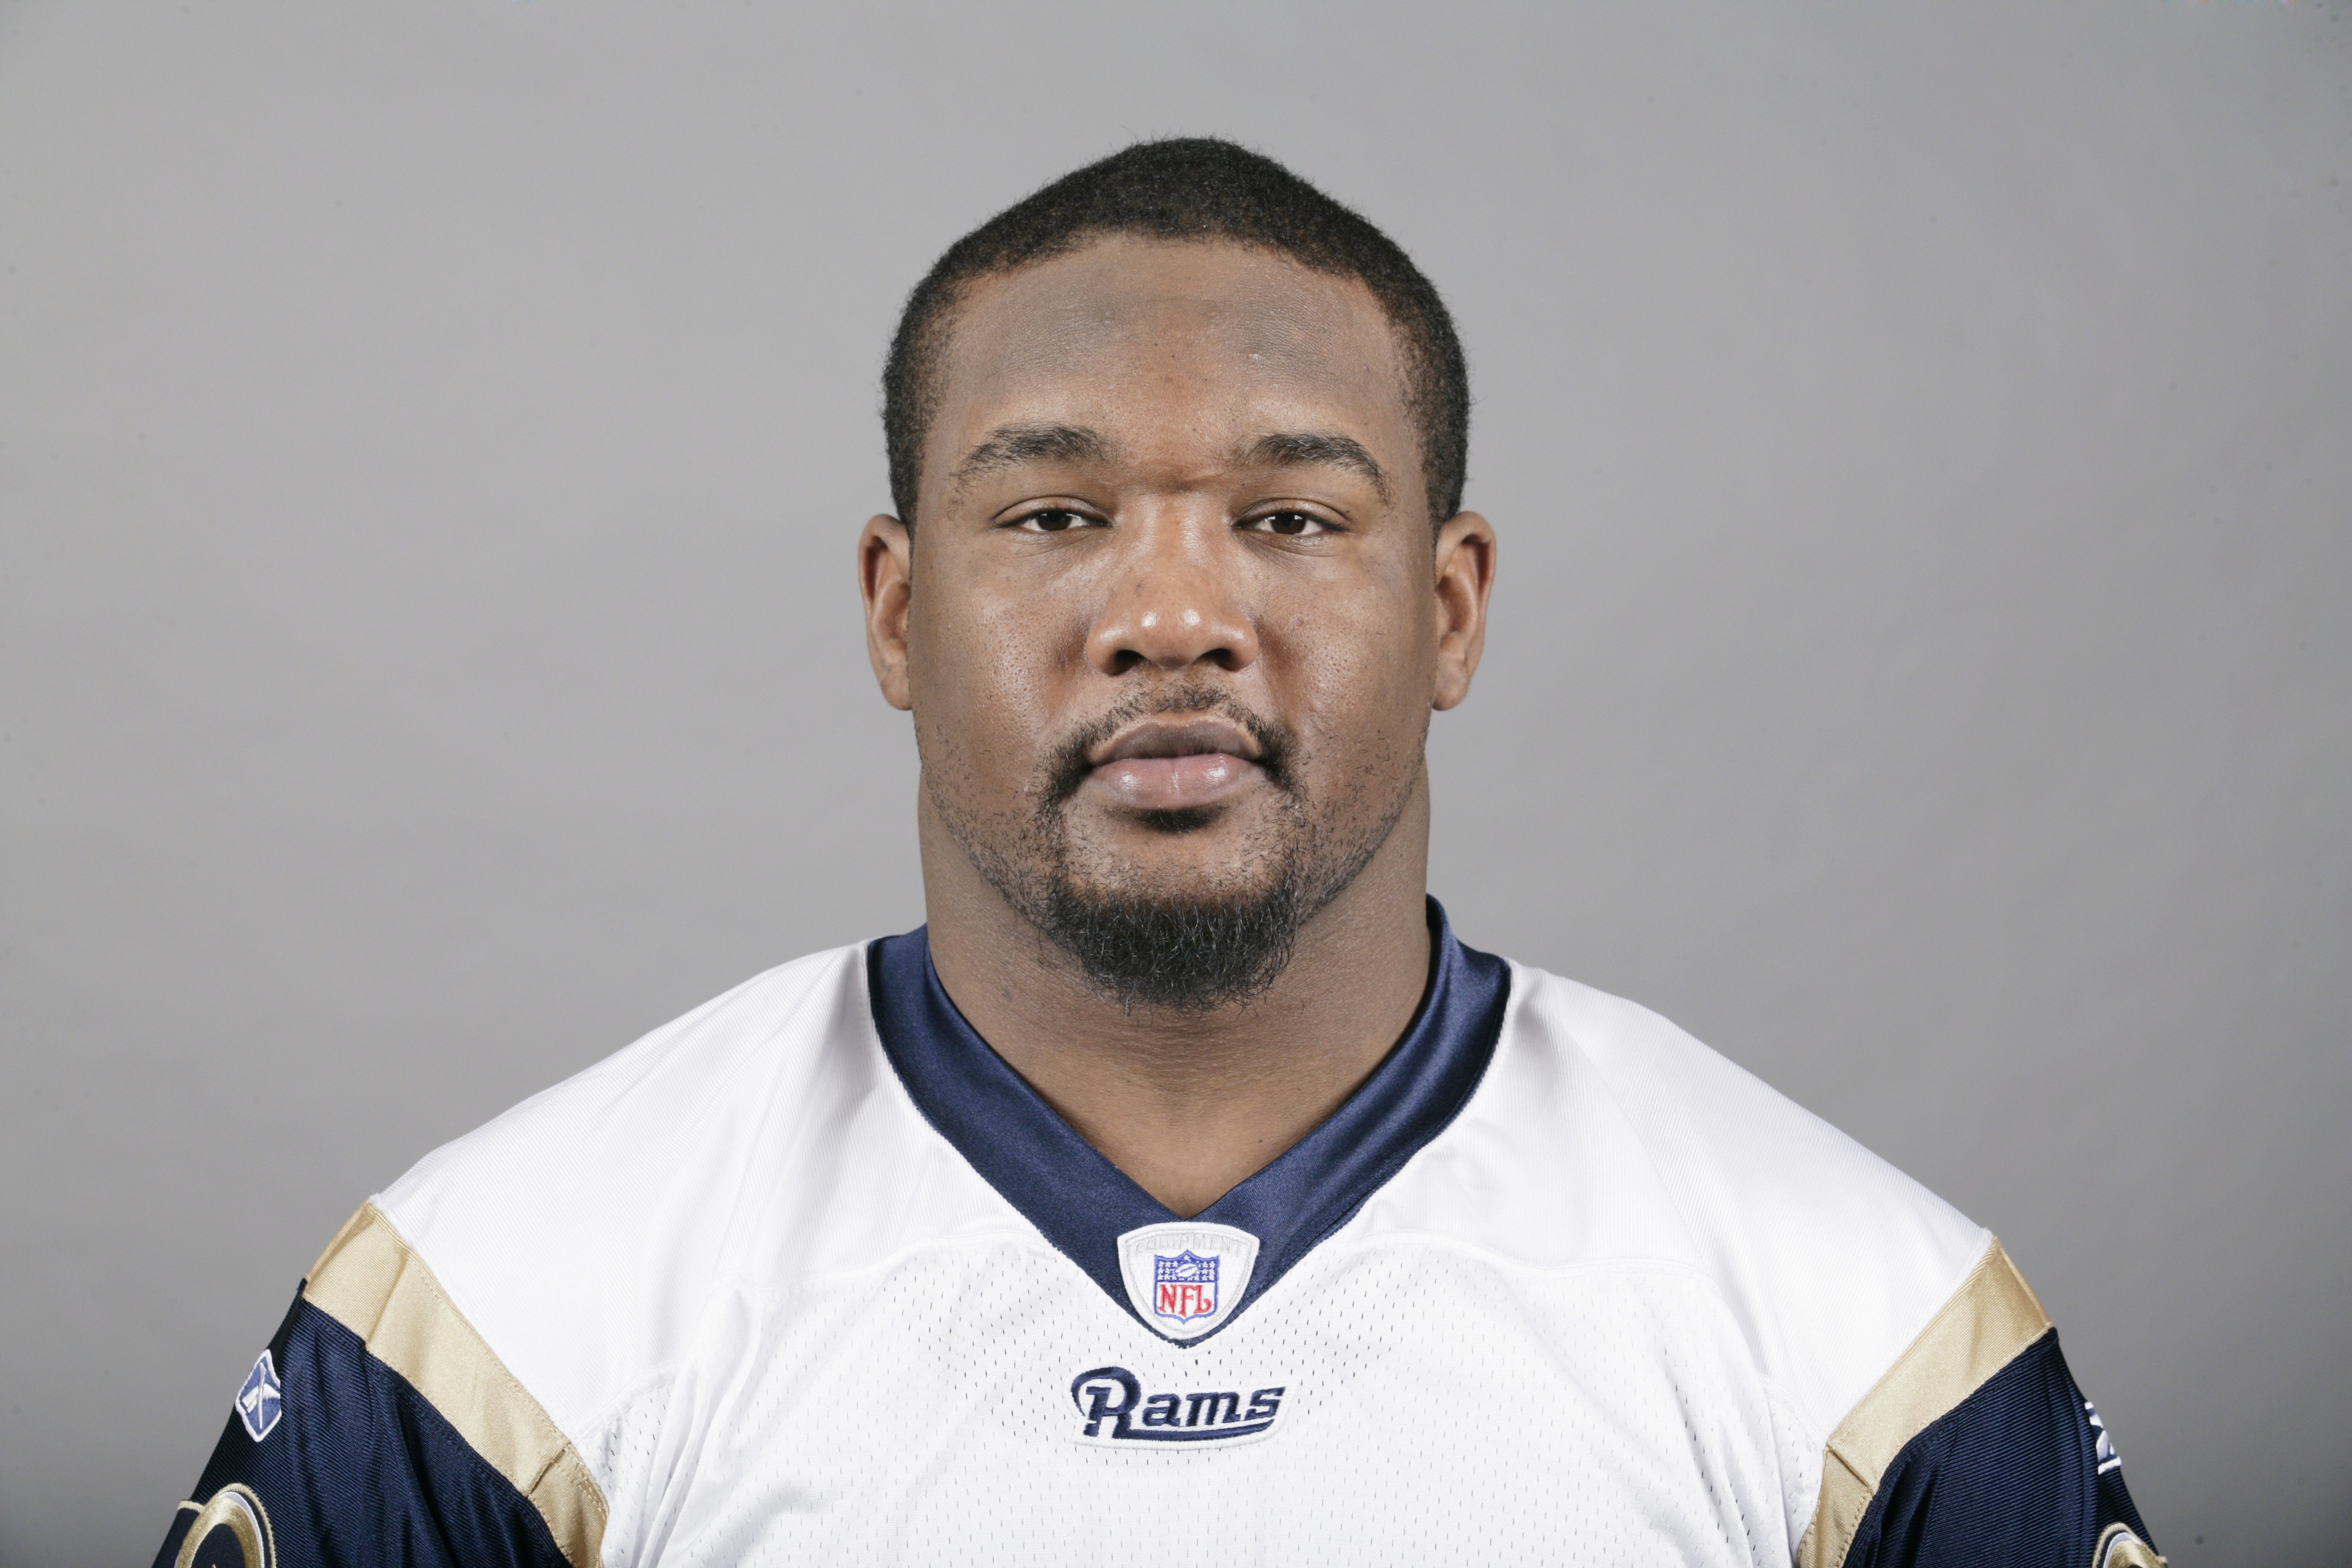 ST. LOUIS - 2009:  Clifton Ryan of the St. Louis Rams poses for his 2009 NFL headshot at photo day in St. Louis, Missouri.  (Photo by NFL Photos)